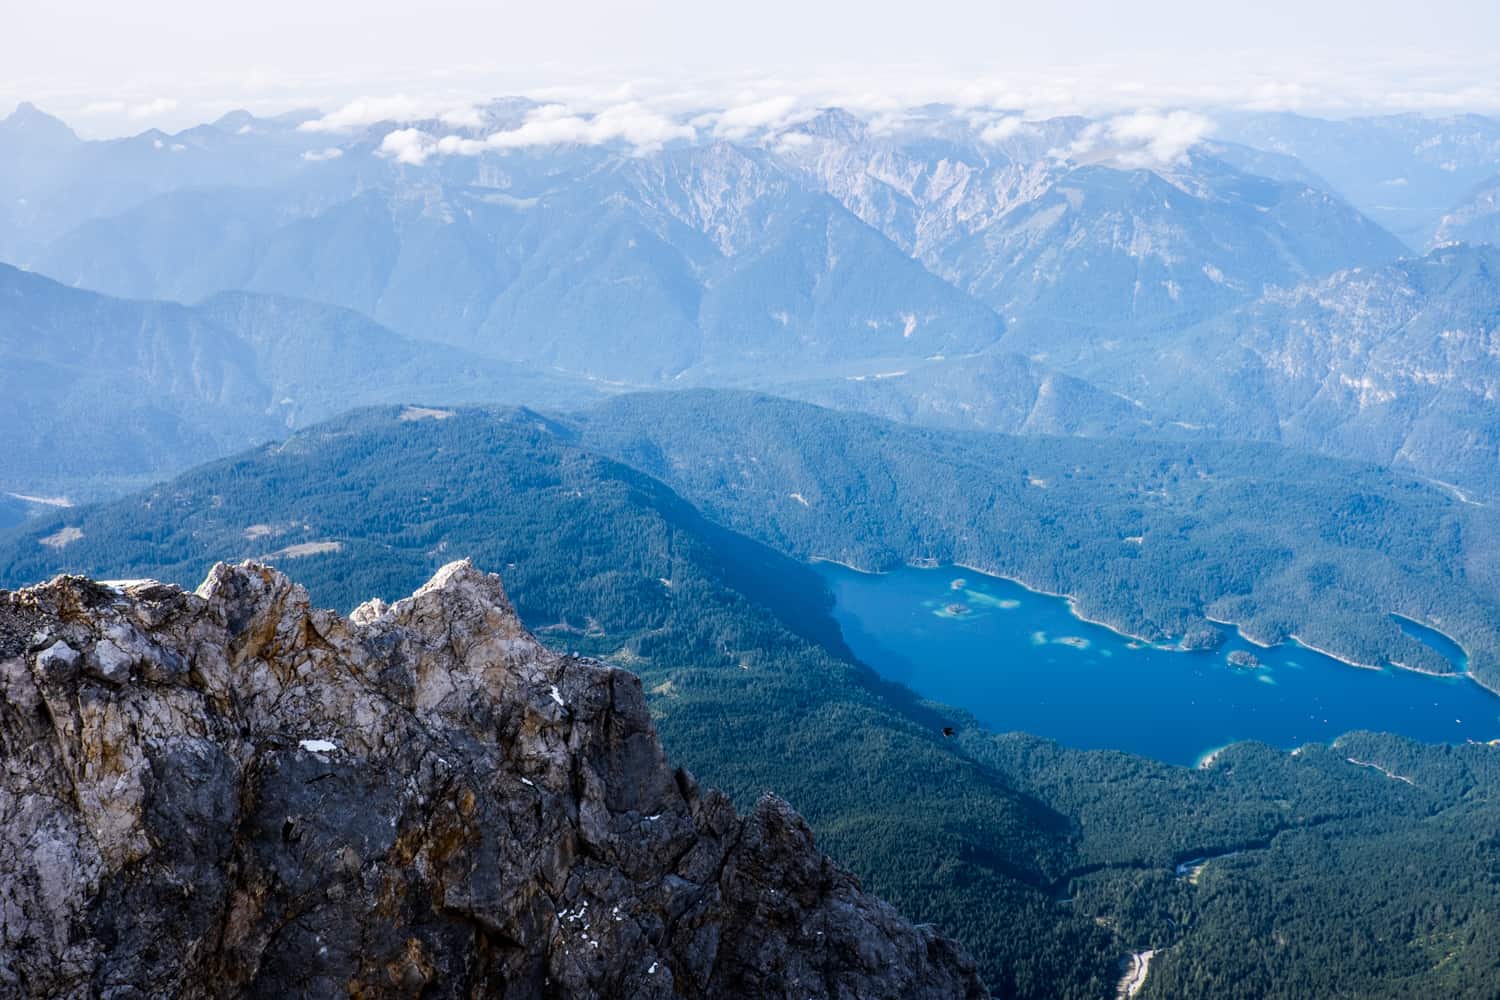 Looking down onto the woodland border of Austria and Germany from Zugspitze Mountain